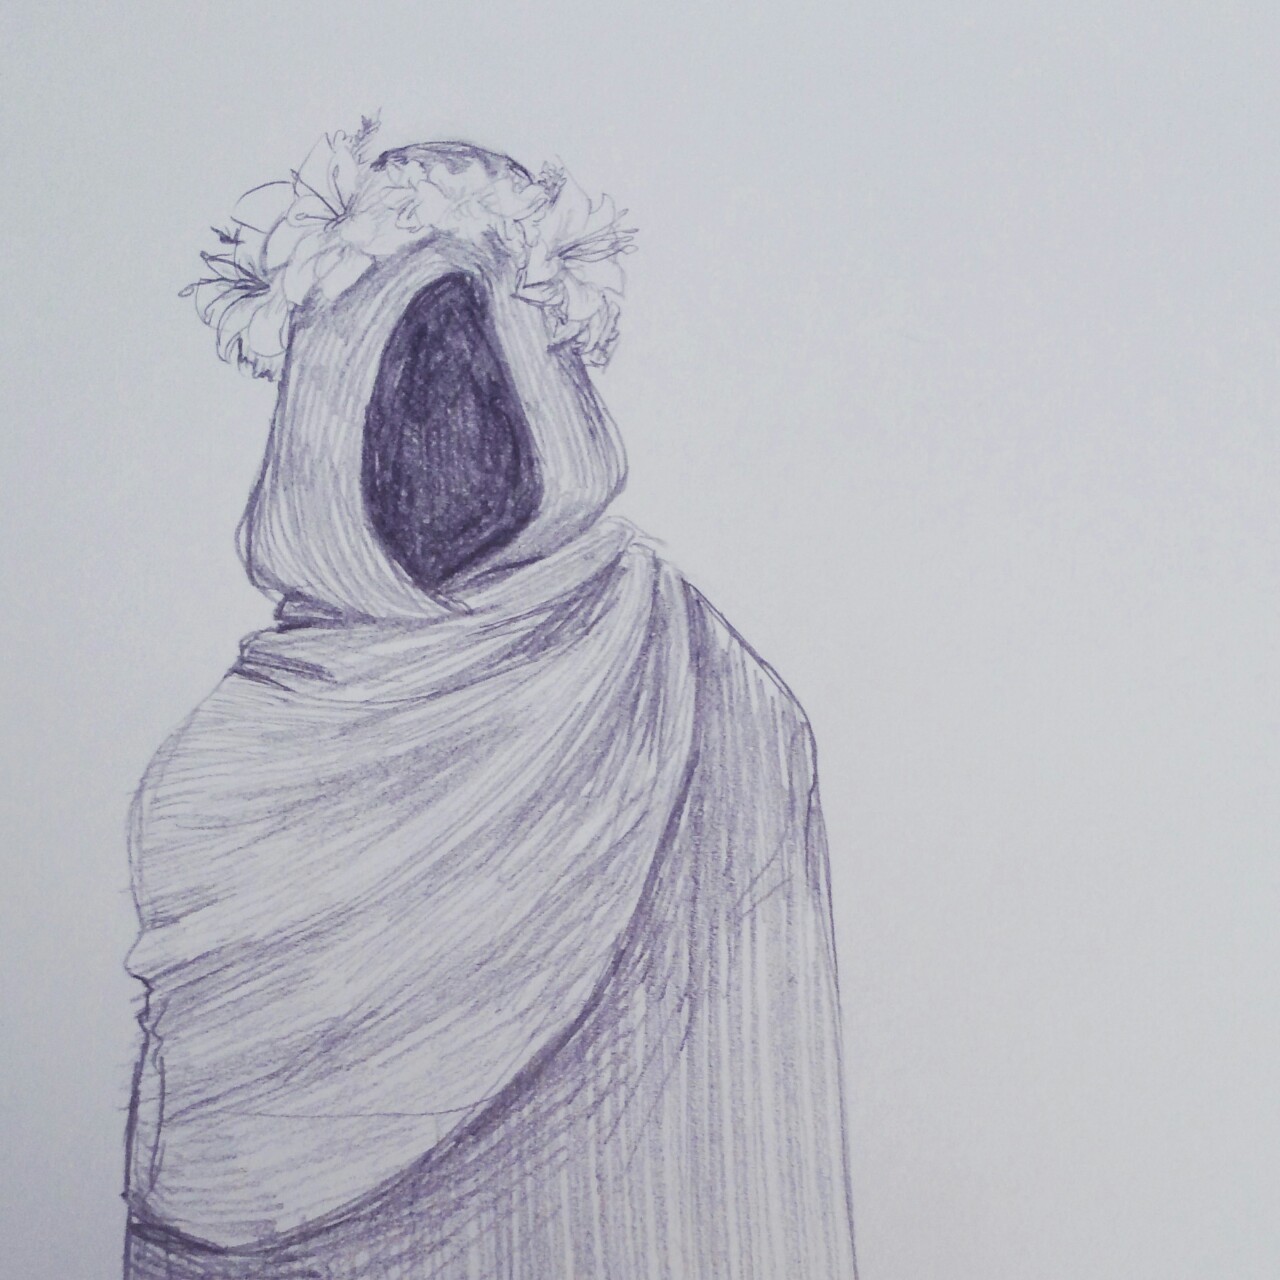 Hooded Figure Drawing - Narration of the hooded figure by daniel cohen ...